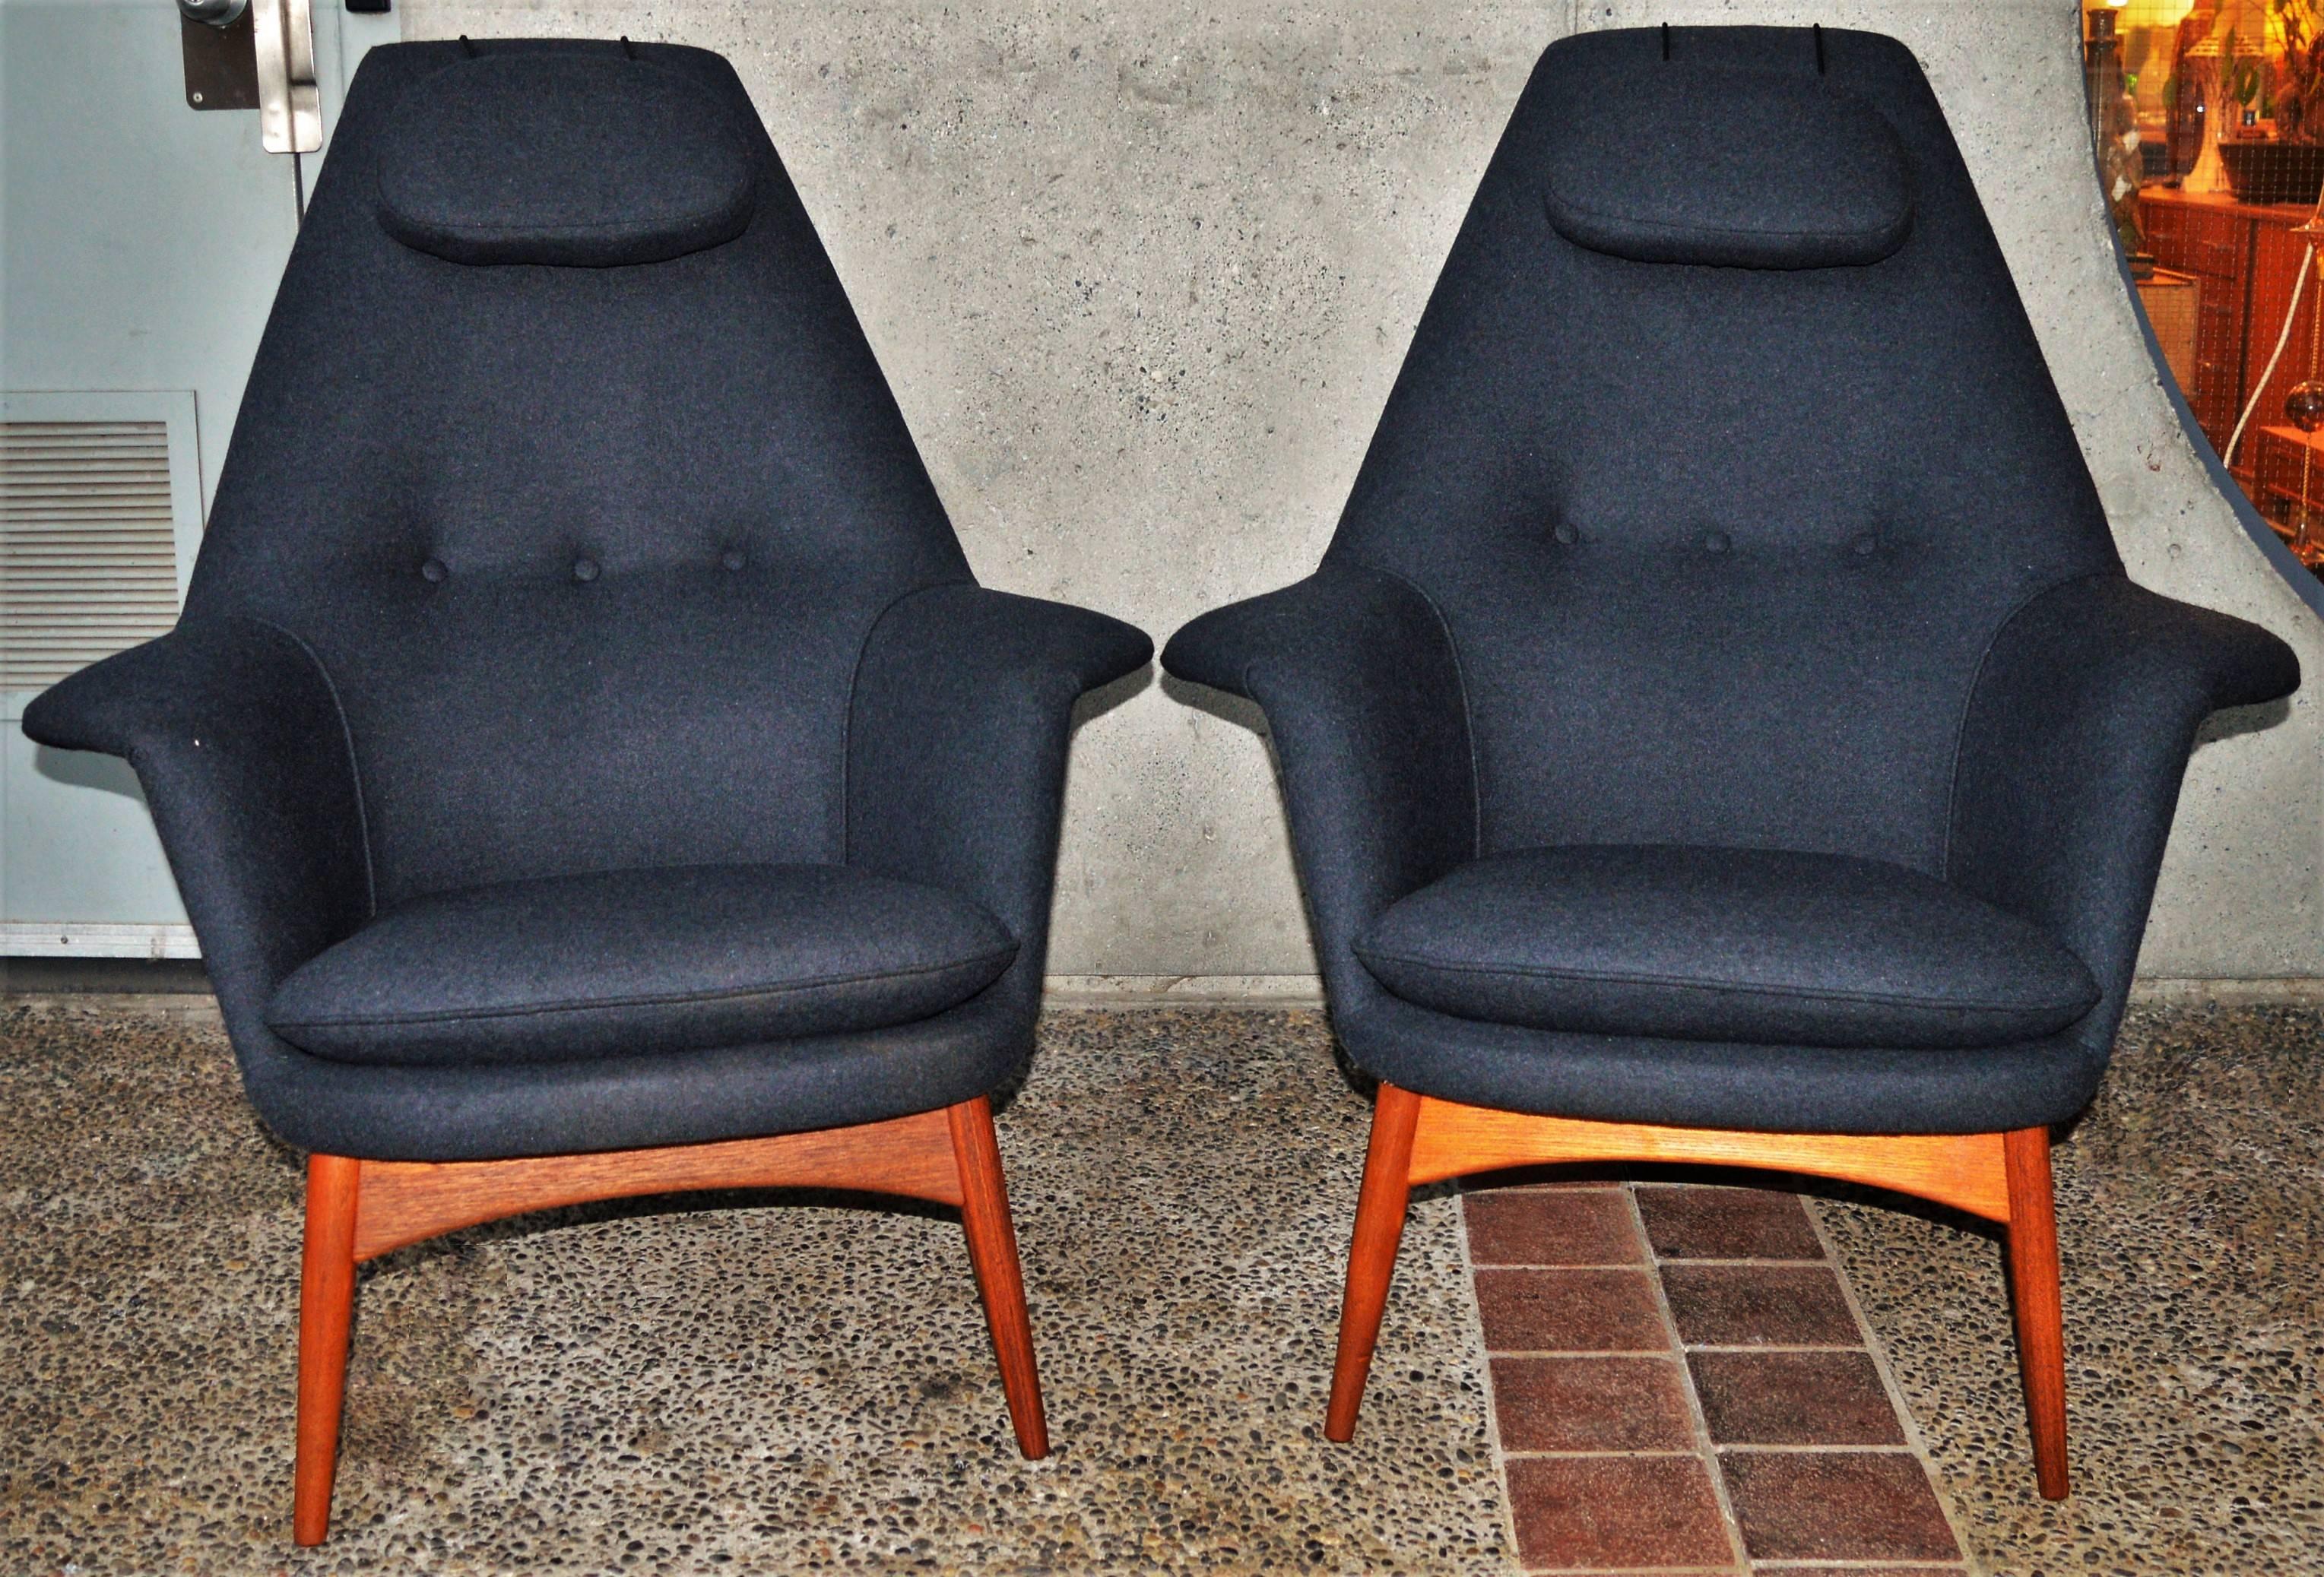 Pair of Teak Manta Ray Chairs in Charcoal Wool by Bjorn Engo for DUX 2